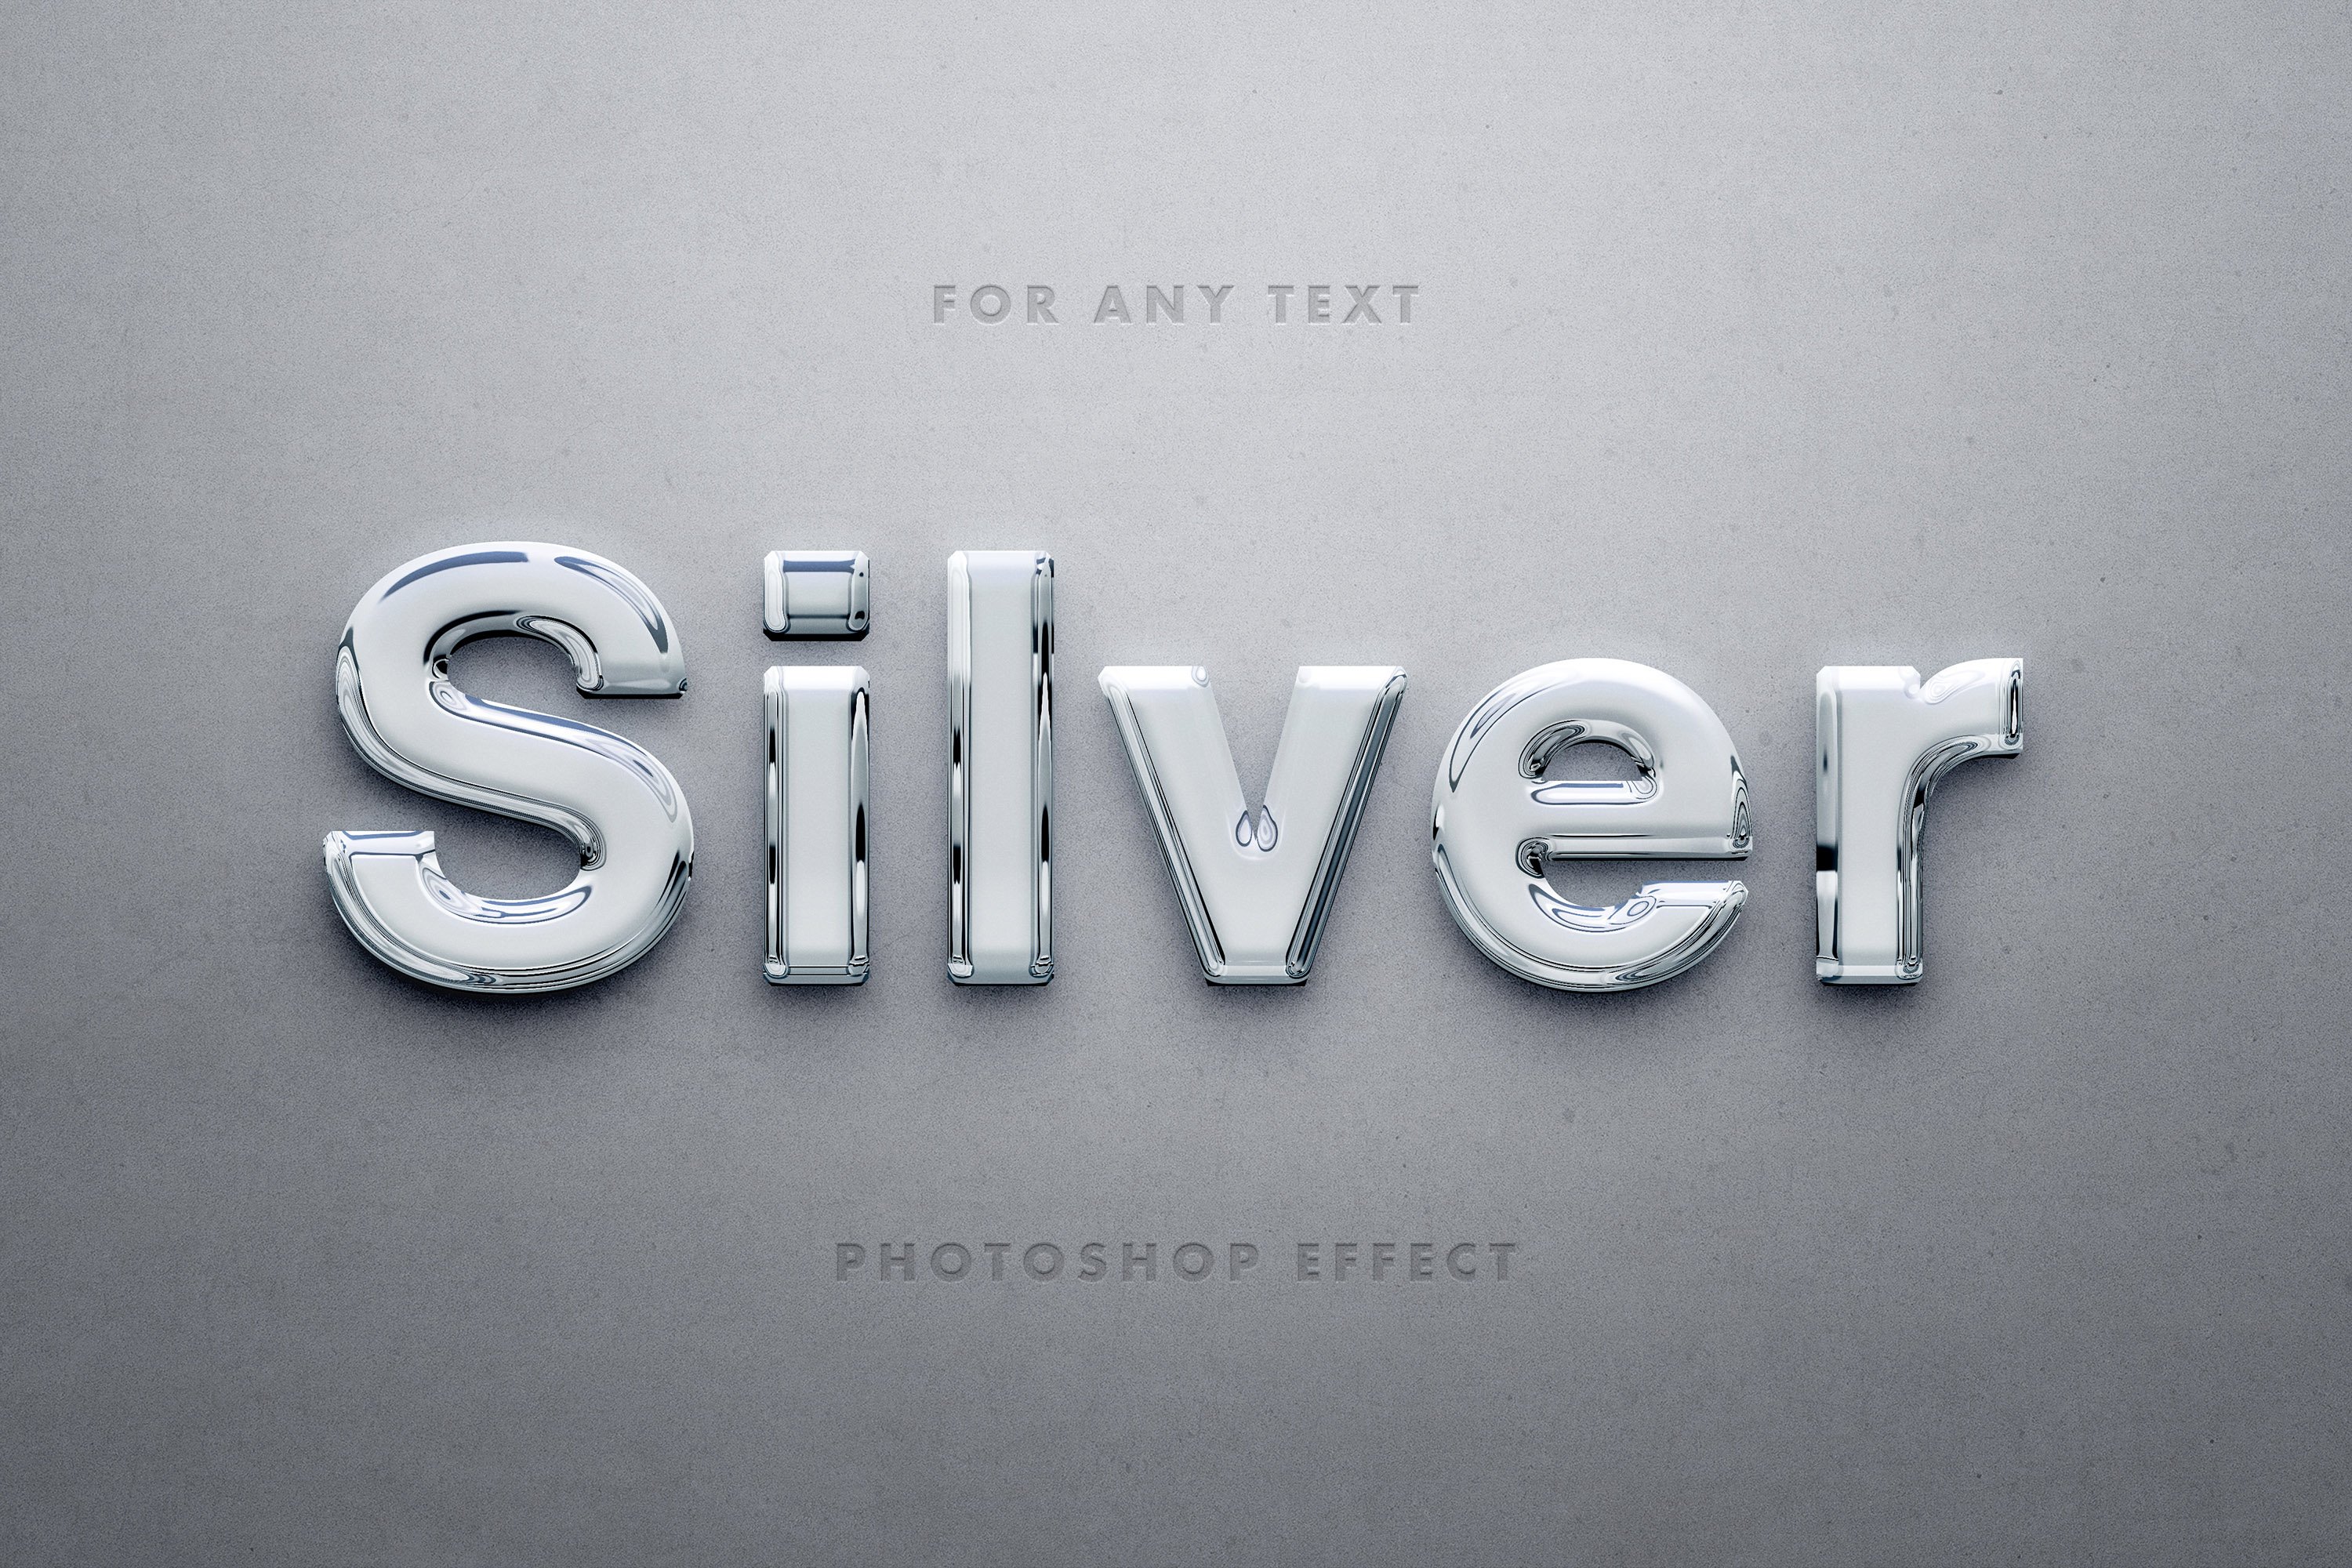 Glossy 3D Silver Text Effectcover image.